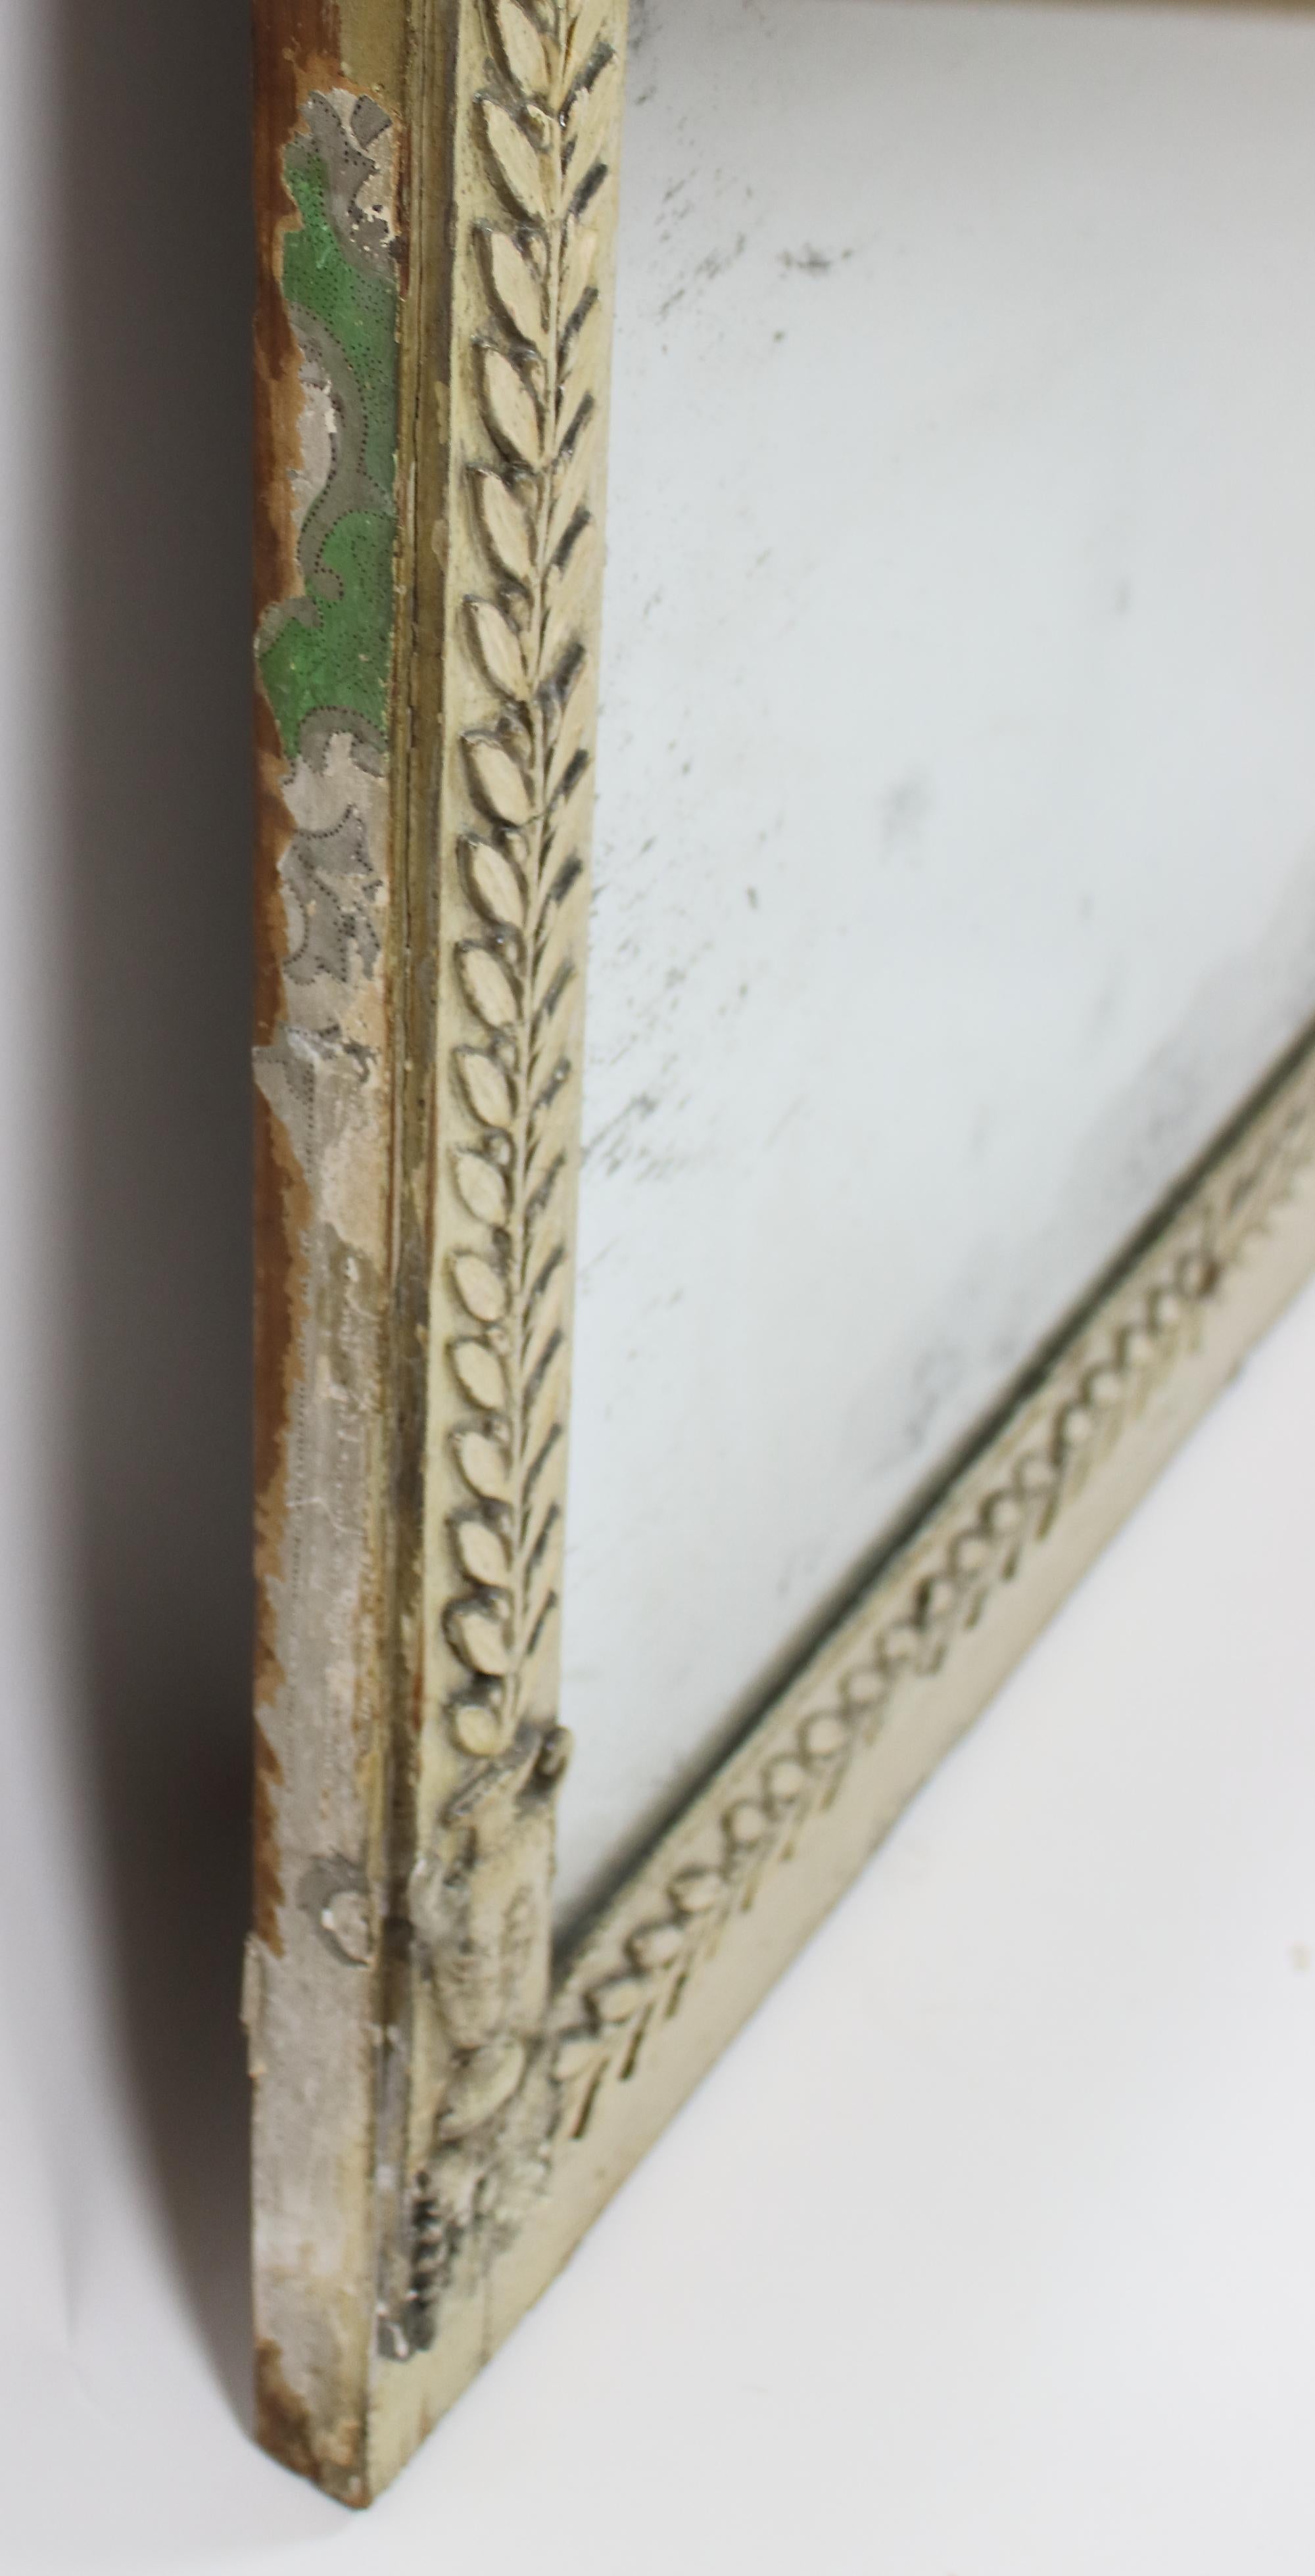 Late 18th Century Italian Neoclassical Wall Mirror with 'Capriccio' Painting 6